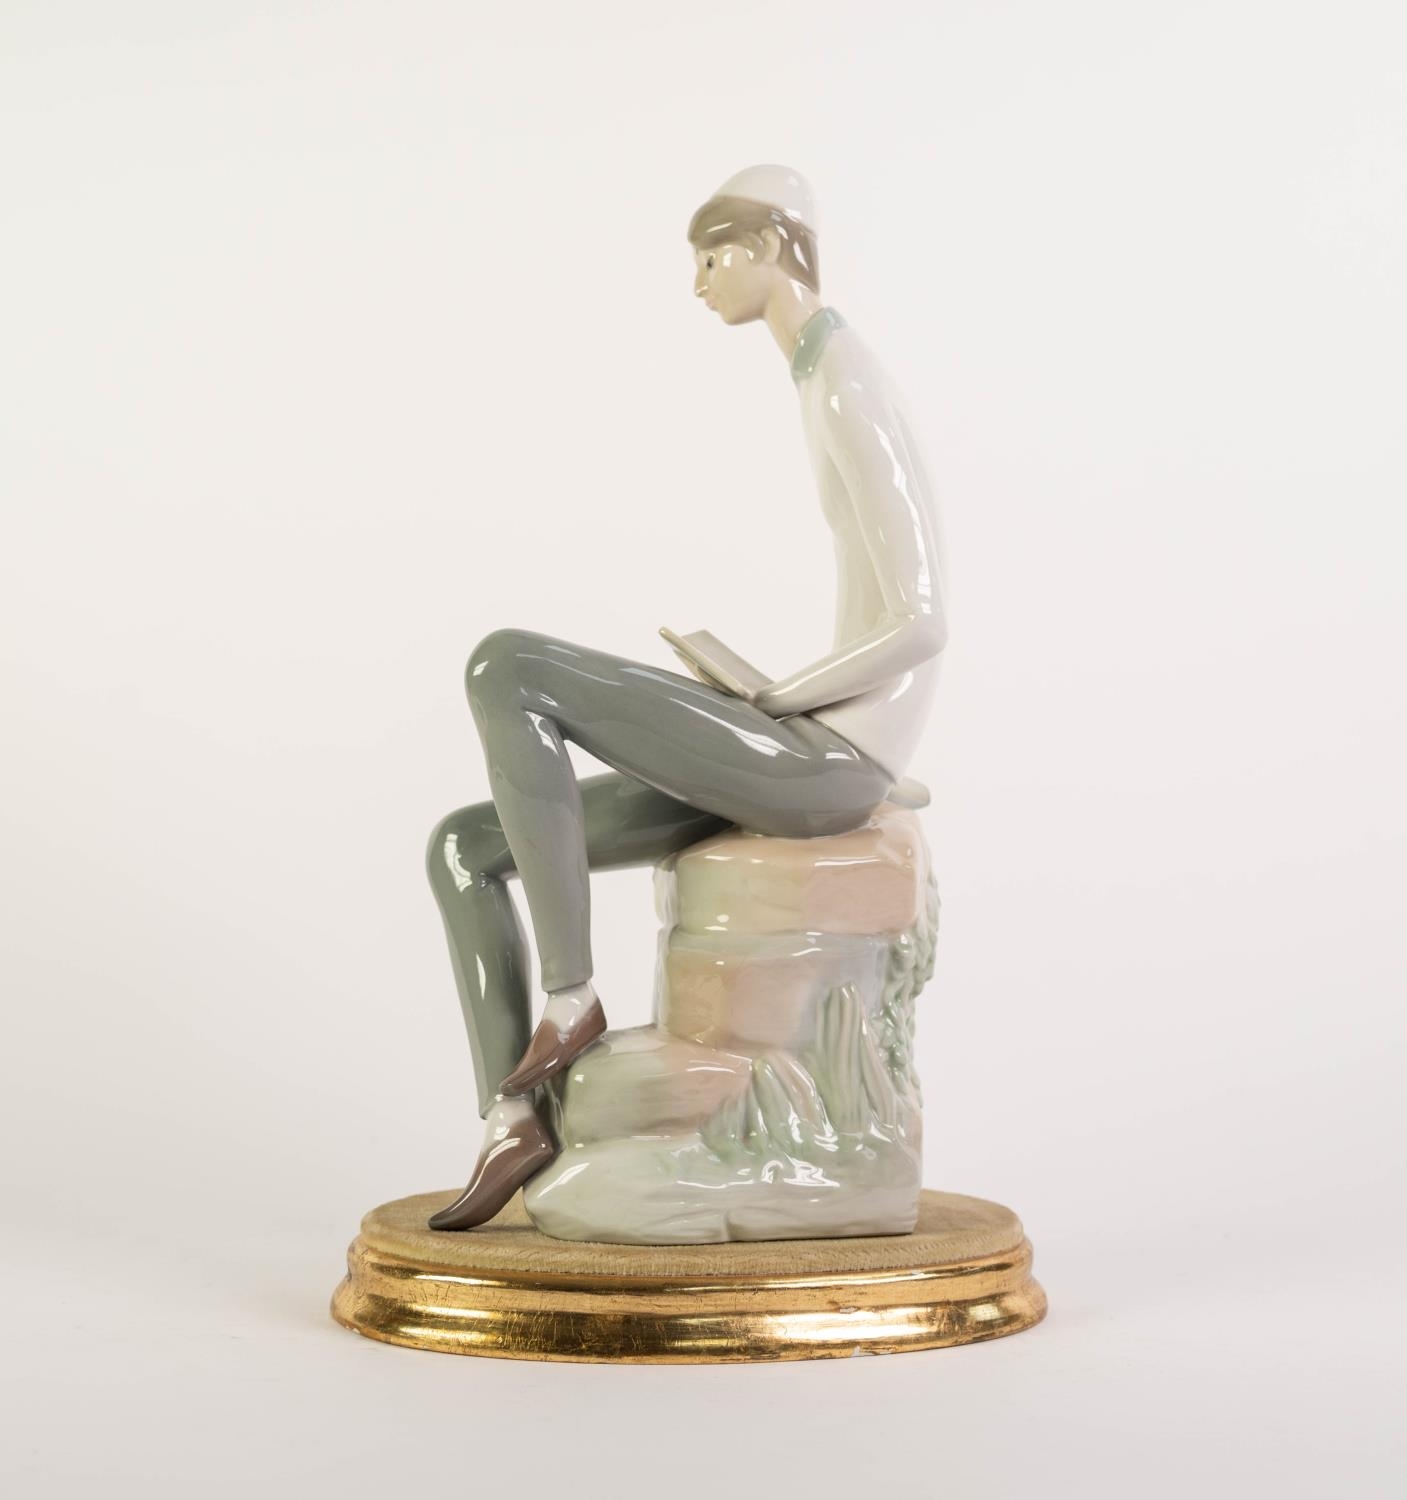 LLADRO PORCELAIN FIGURE, modelled as a young Jewish man, sat on a rocky outcrop and reading from - Image 2 of 3